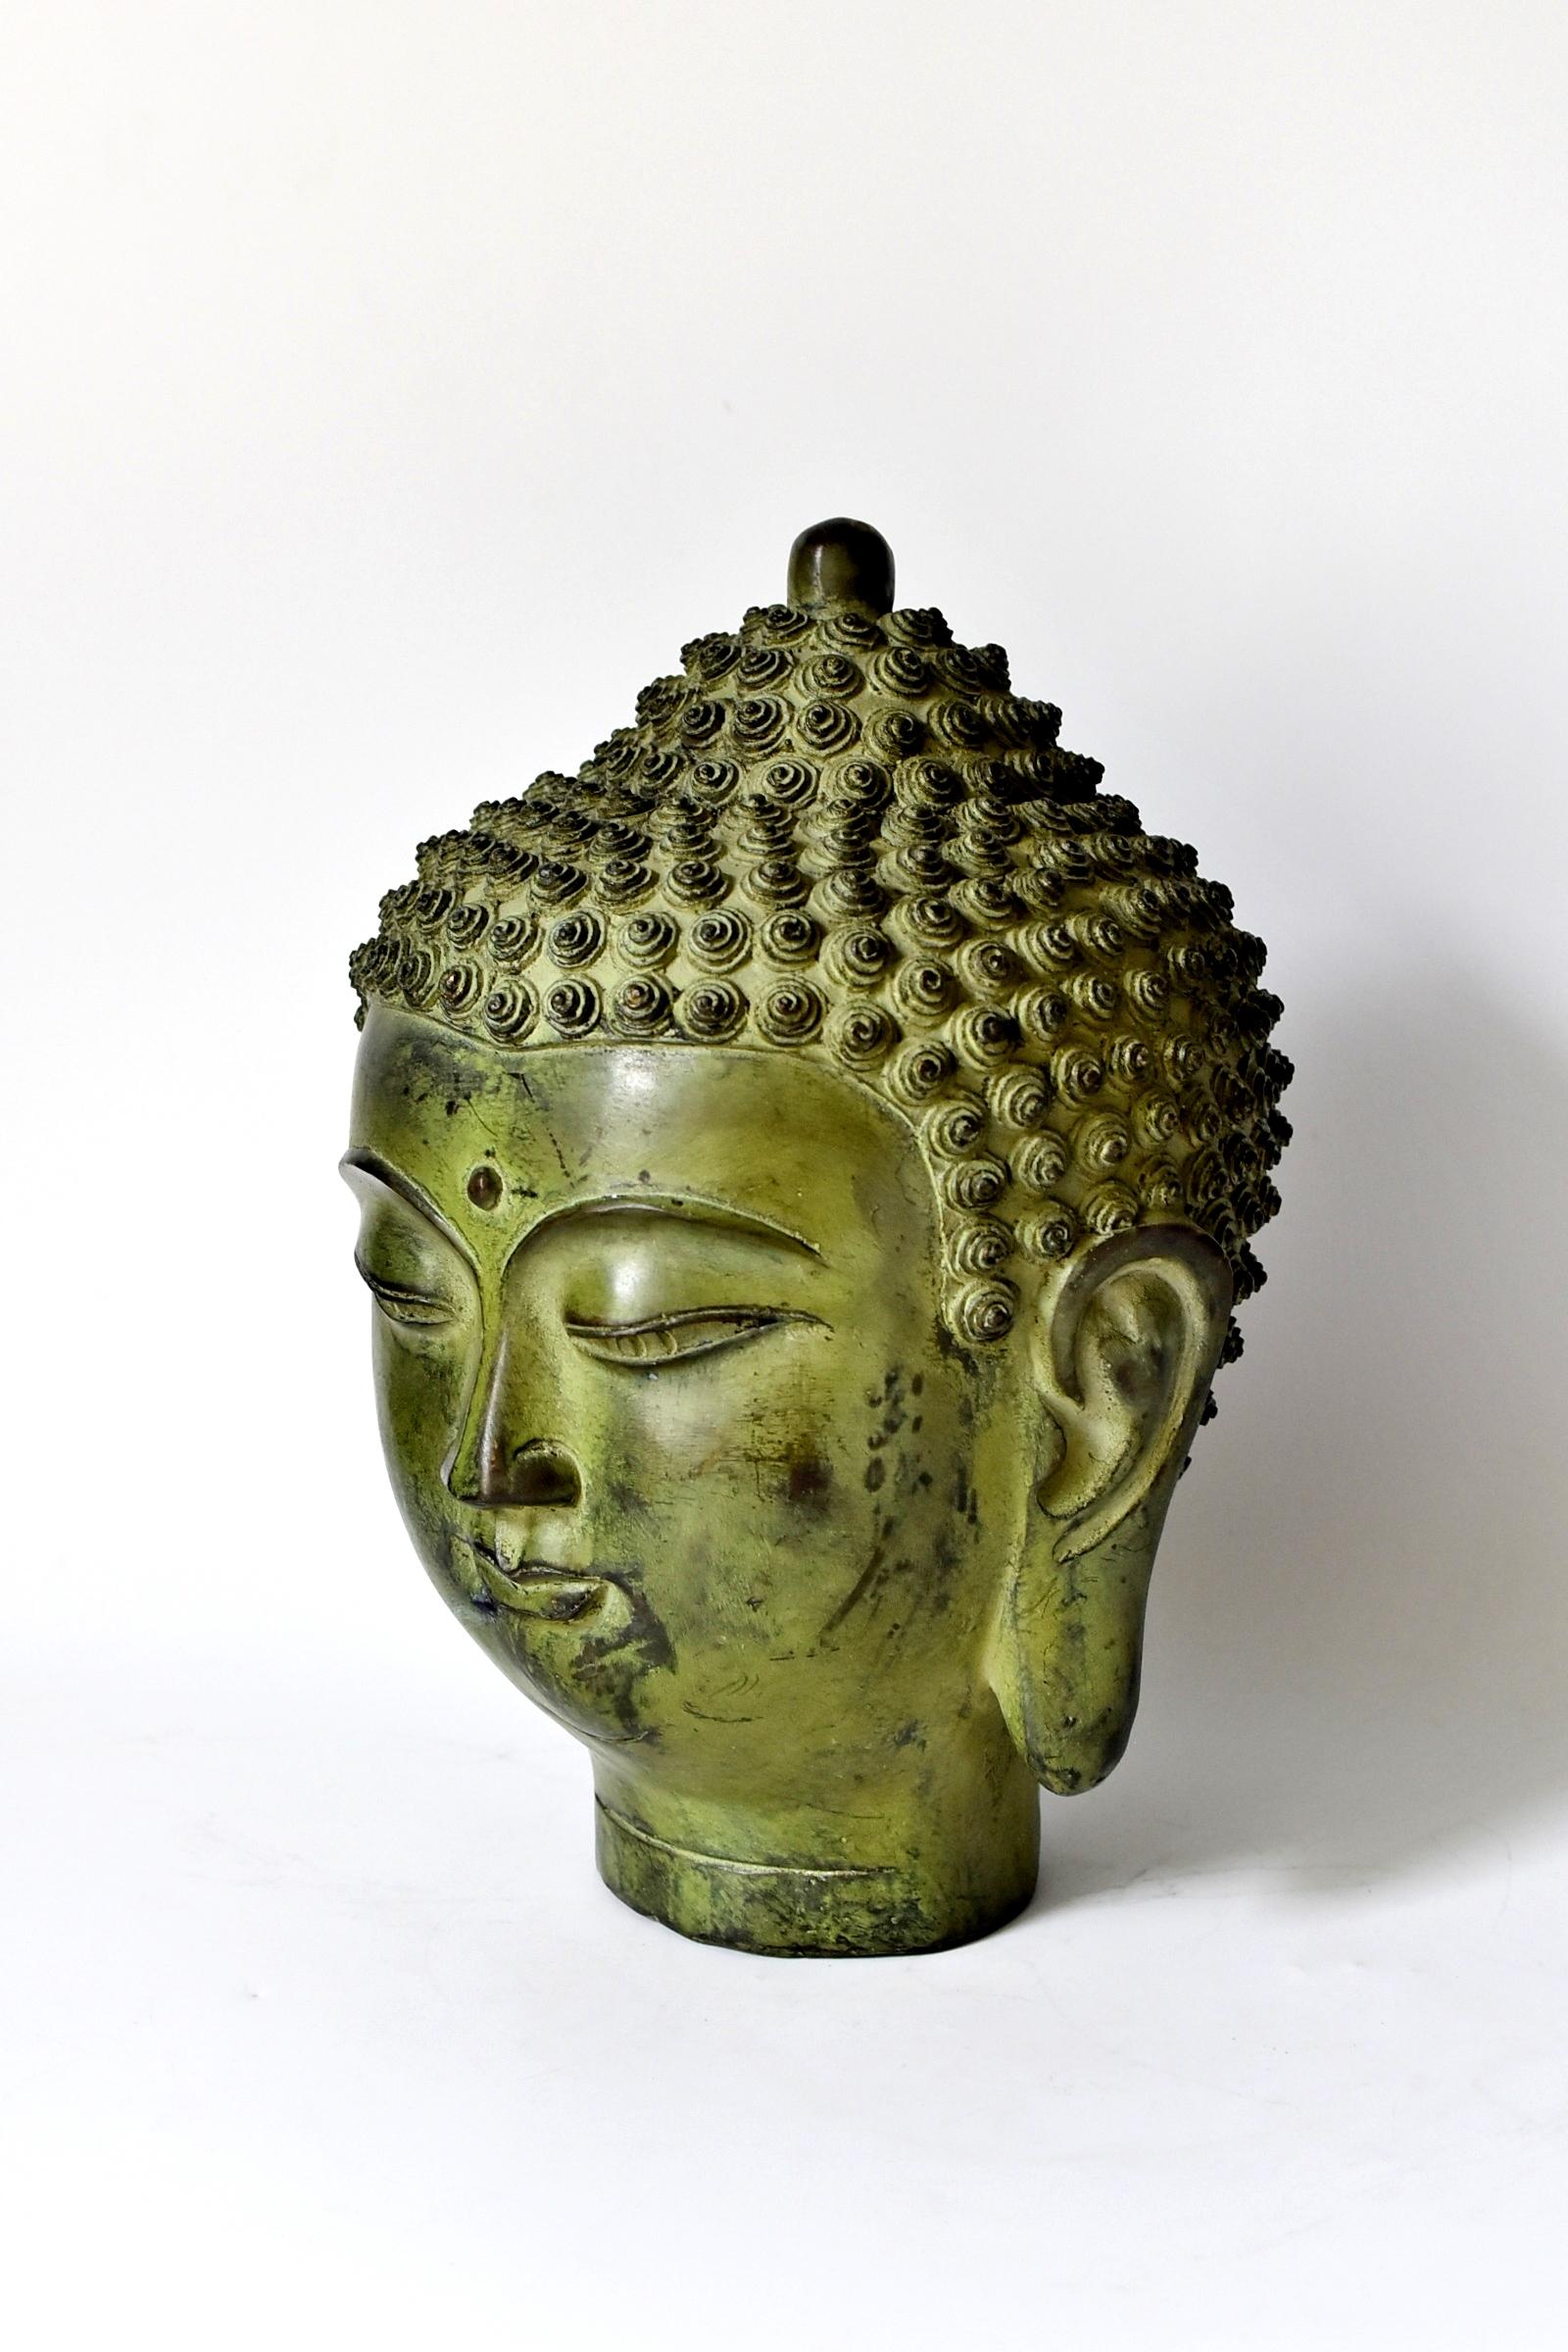 A beautiful large Buddha head. The style of the piece is of the Tang dynasty era, with a full face, long ear lobes and scrolled hair style. Beautiful, finely defined facial features convey a sense of calm and serenity.